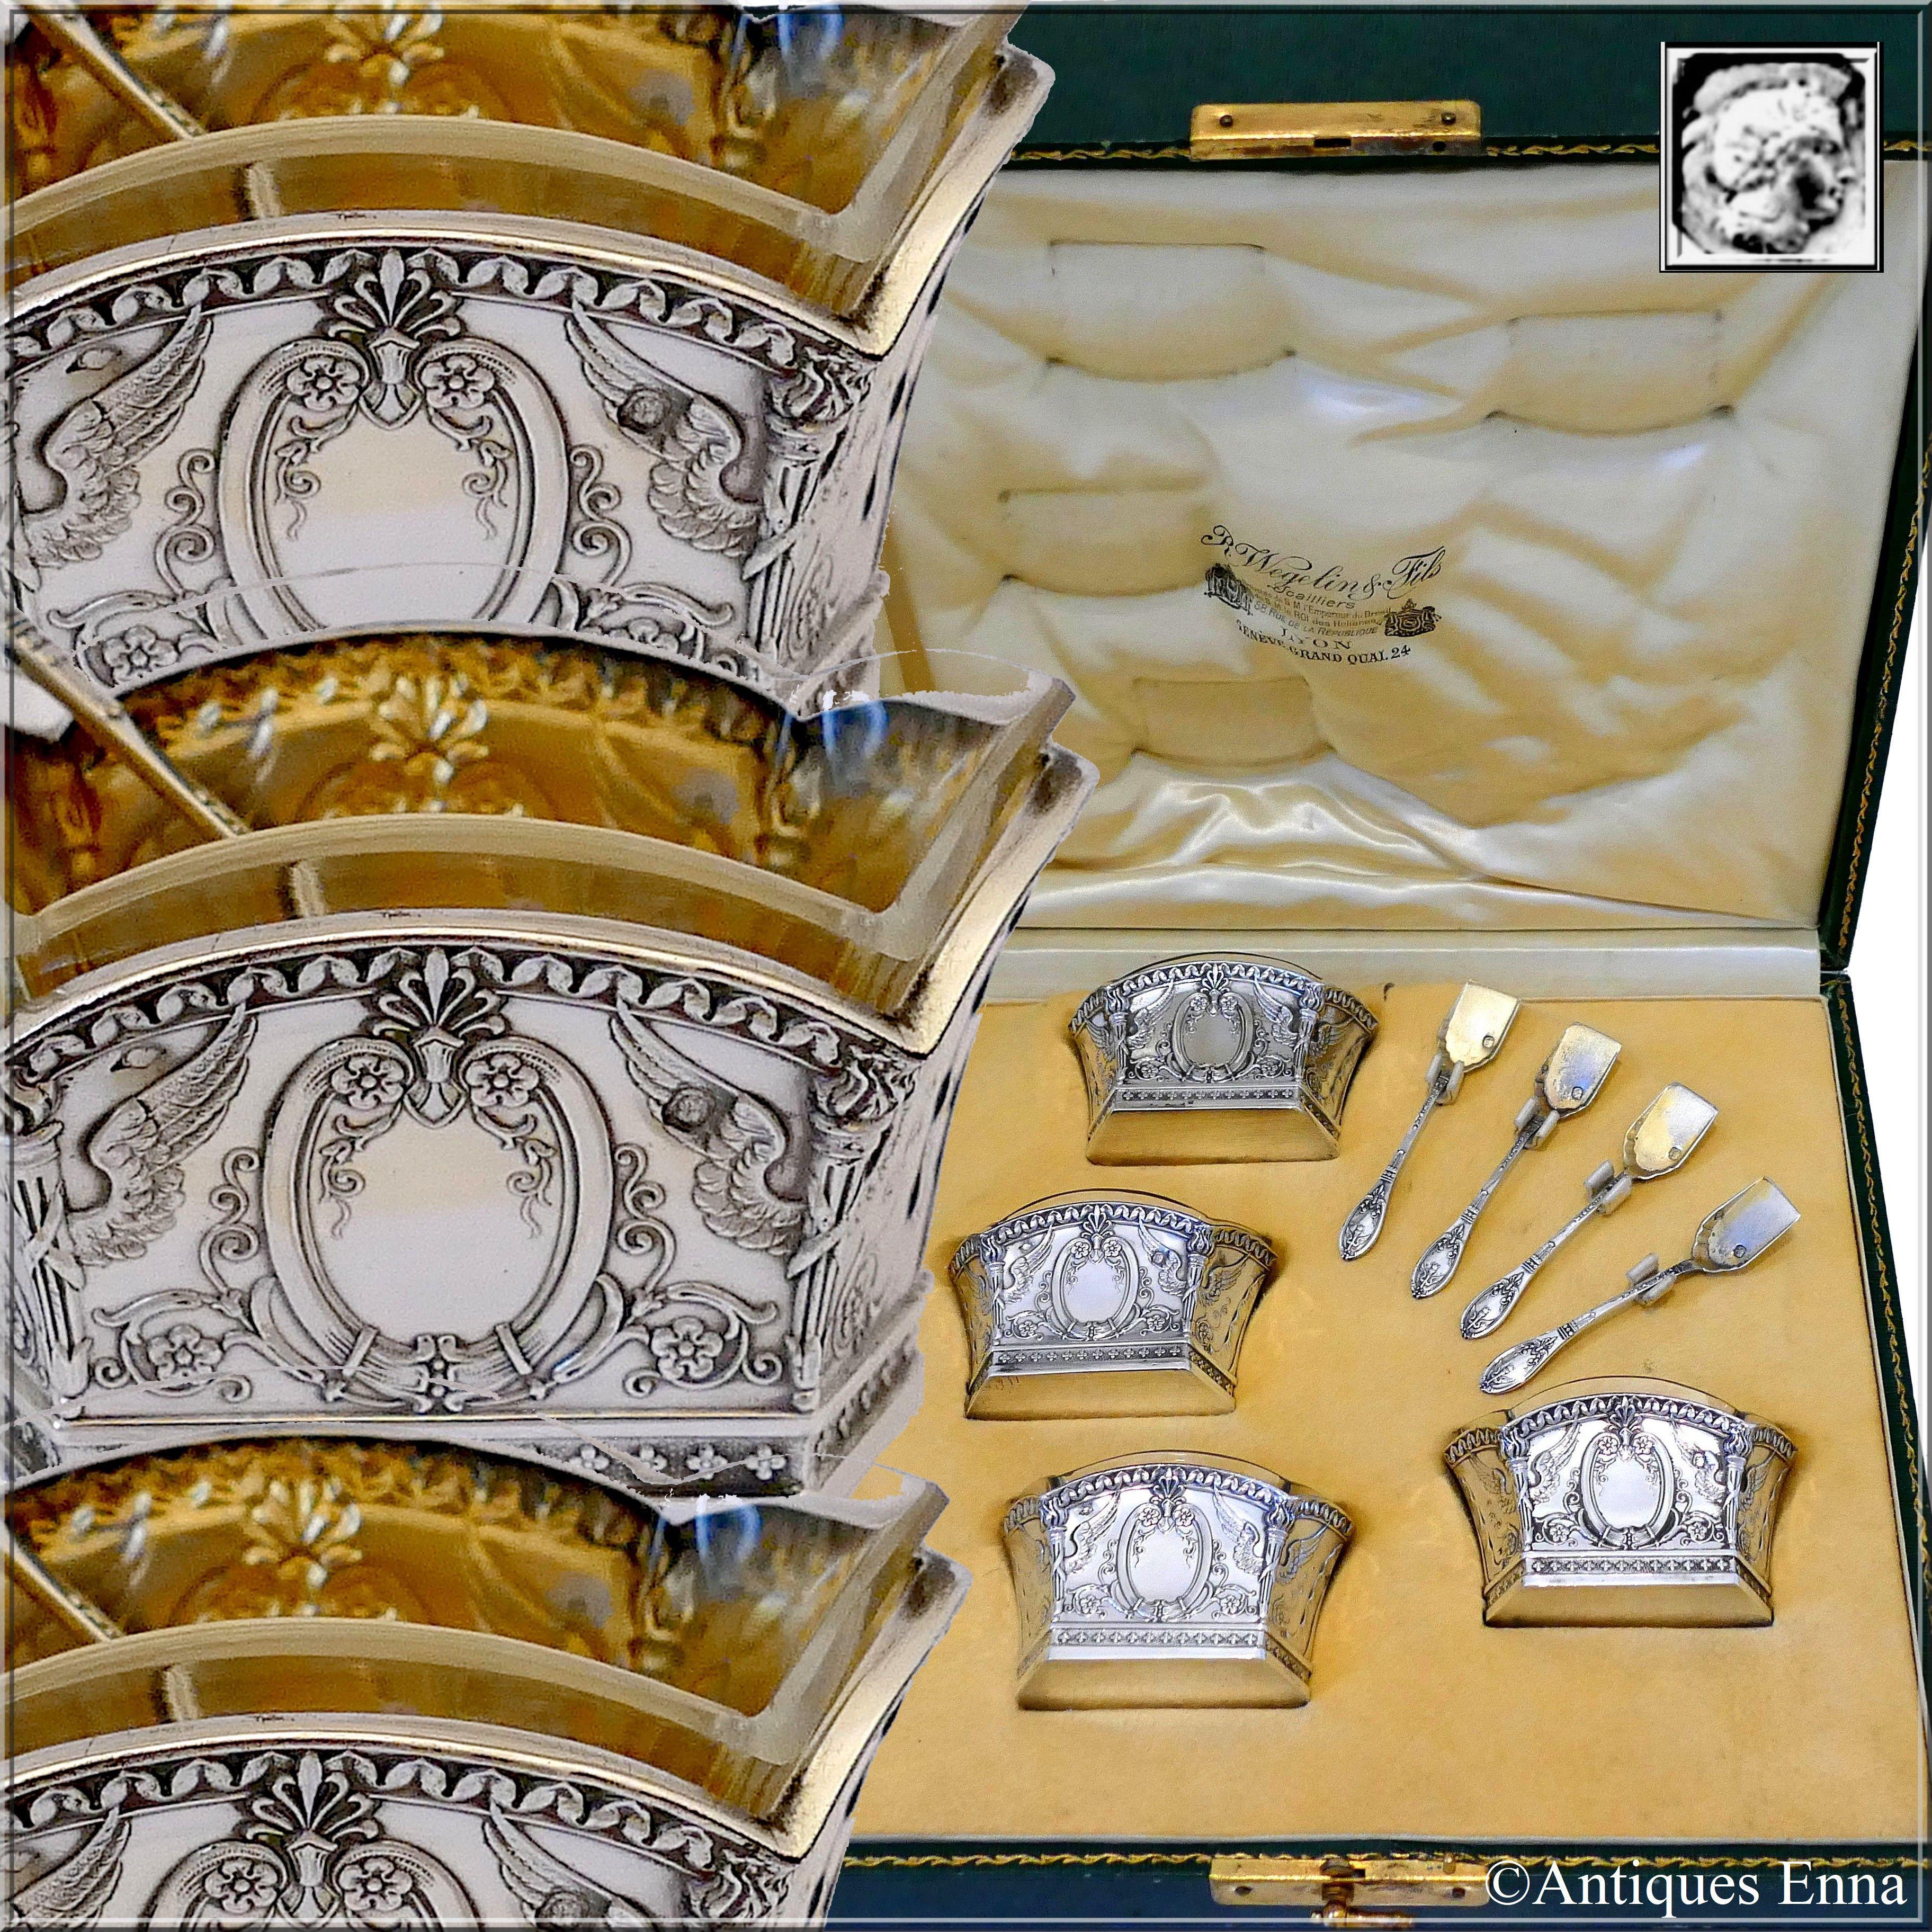 Head of Minerve 1st titre for 950/1000 French sterling silver guarantee.

Fabulous antique 19th century French sterling silver salt cellars 4-piece with original spoons. A set of truly exceptional quality, for the richness of his decoration for